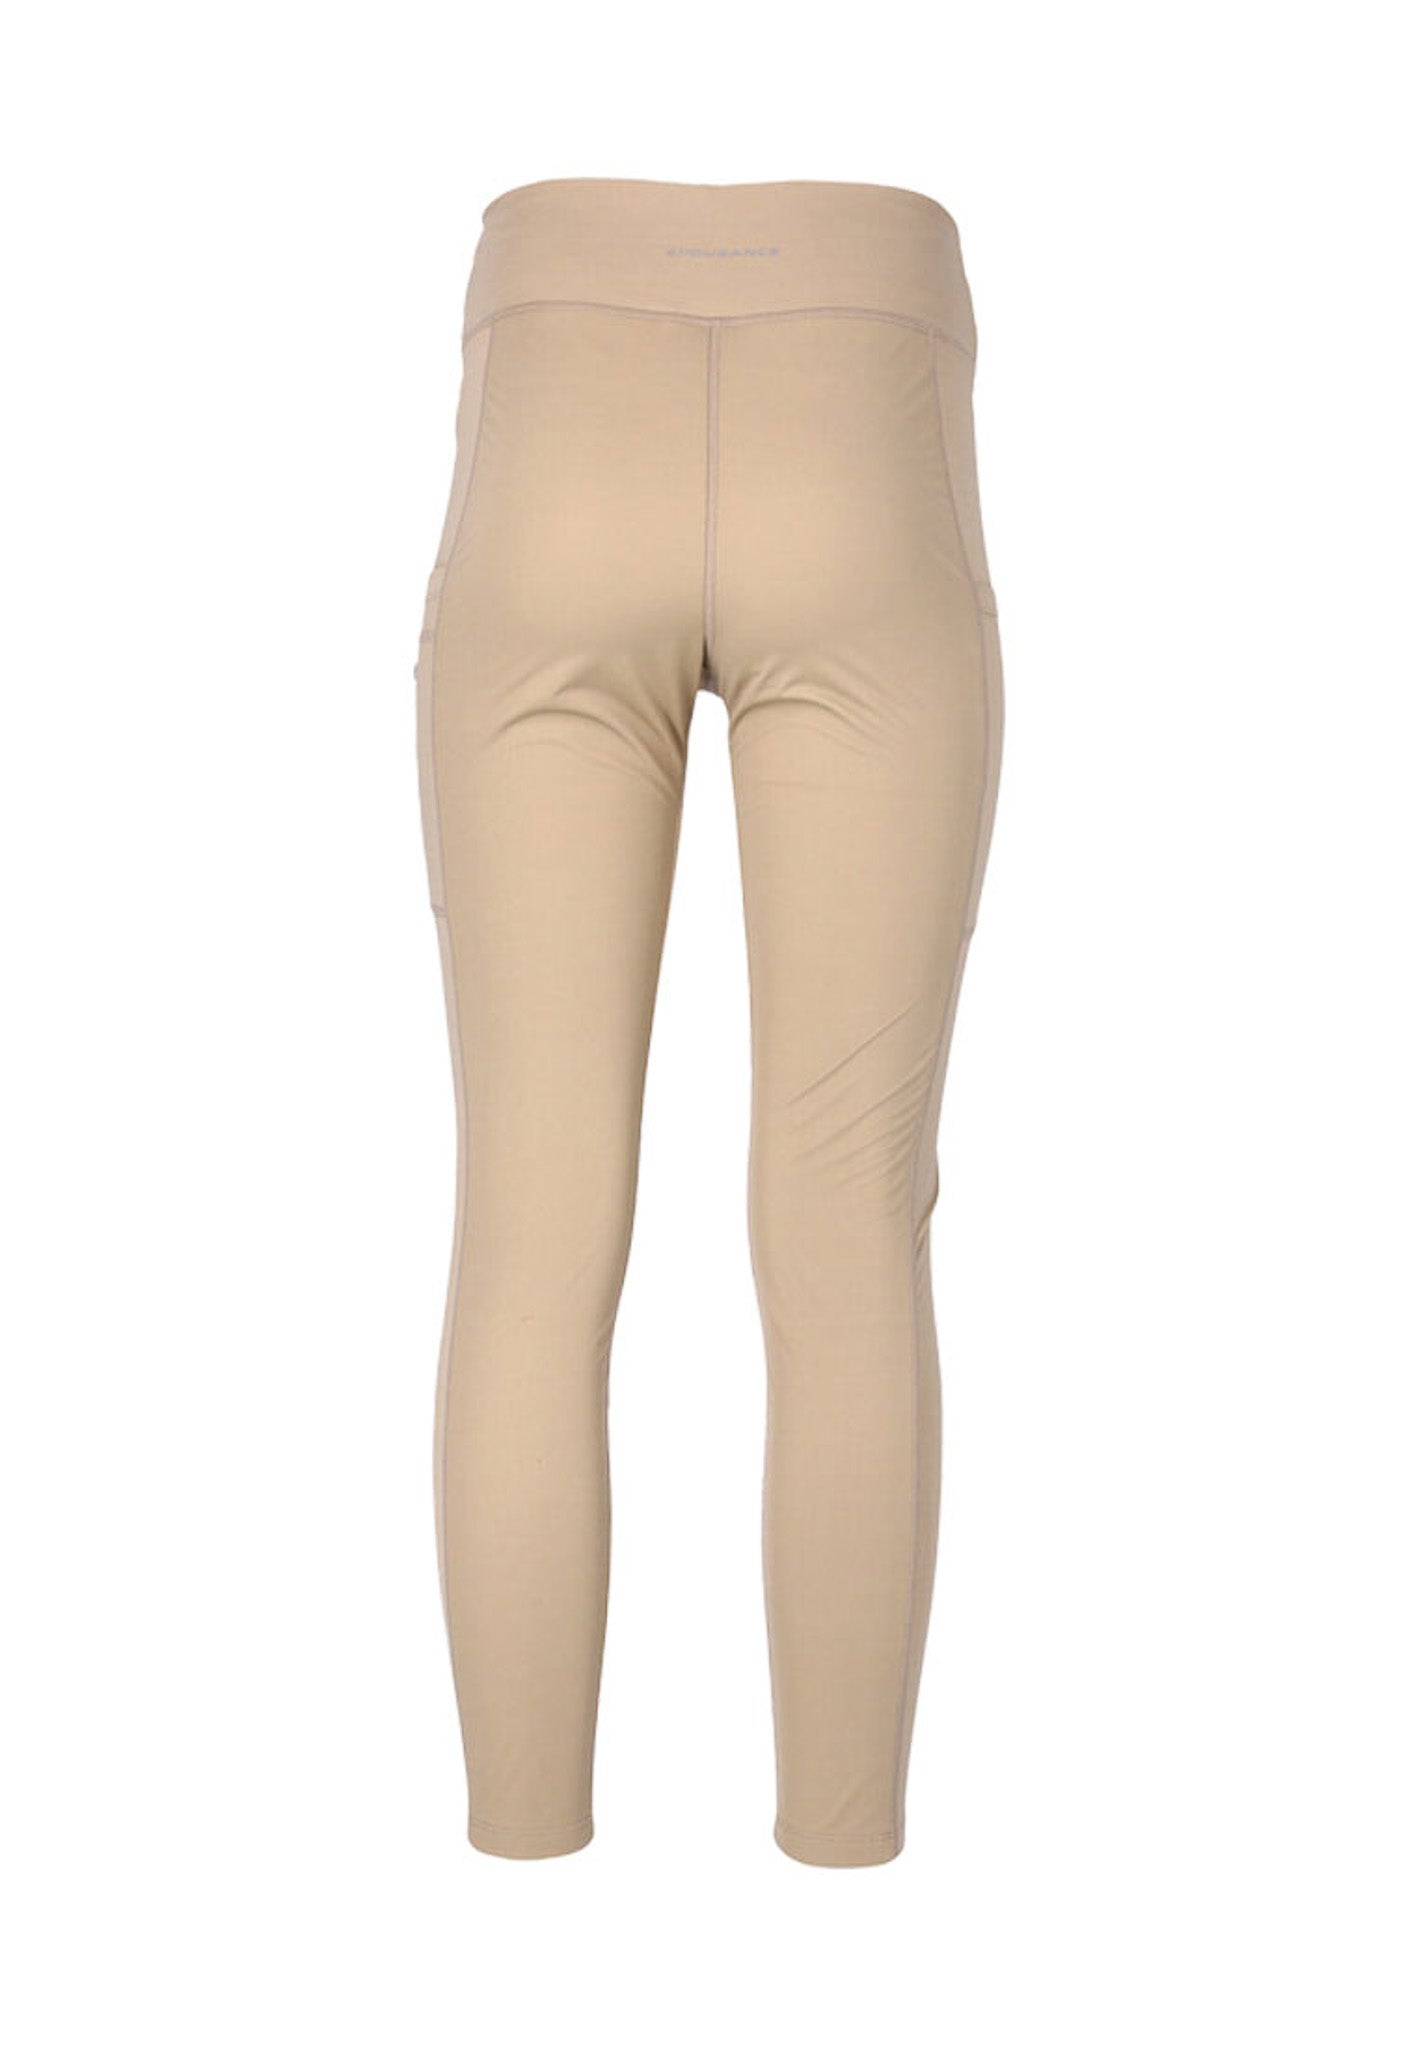 Sports Group Denmark Hose lang1136 taupe